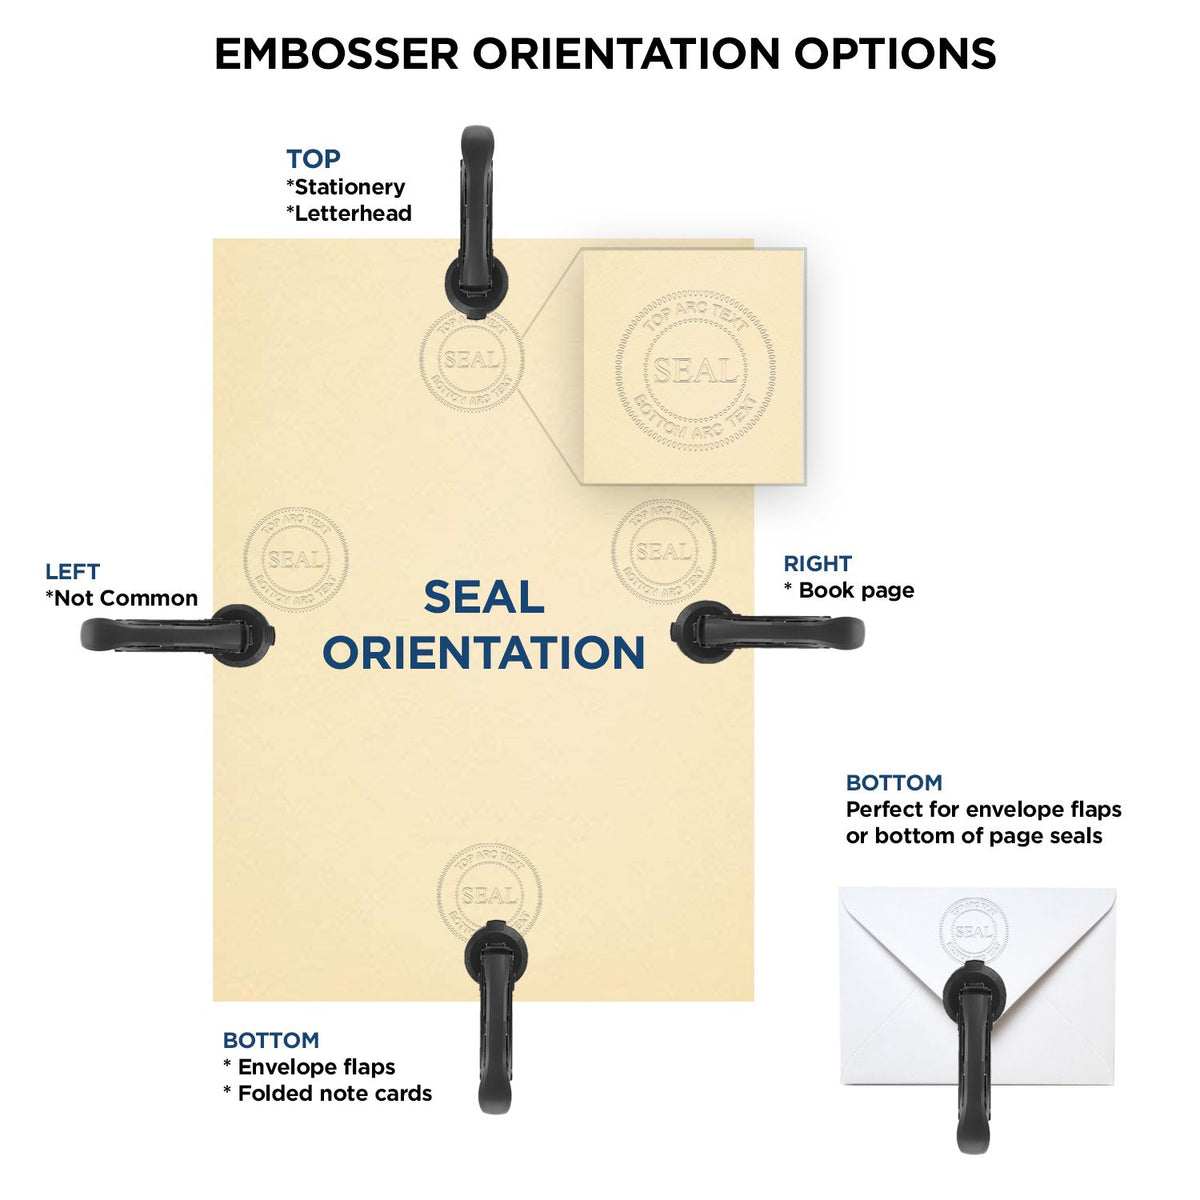 An infographic for the Handheld Kentucky Land Surveyor Seal showing embosser orientation, this is showing examples of a top, bottom, right and left insert.